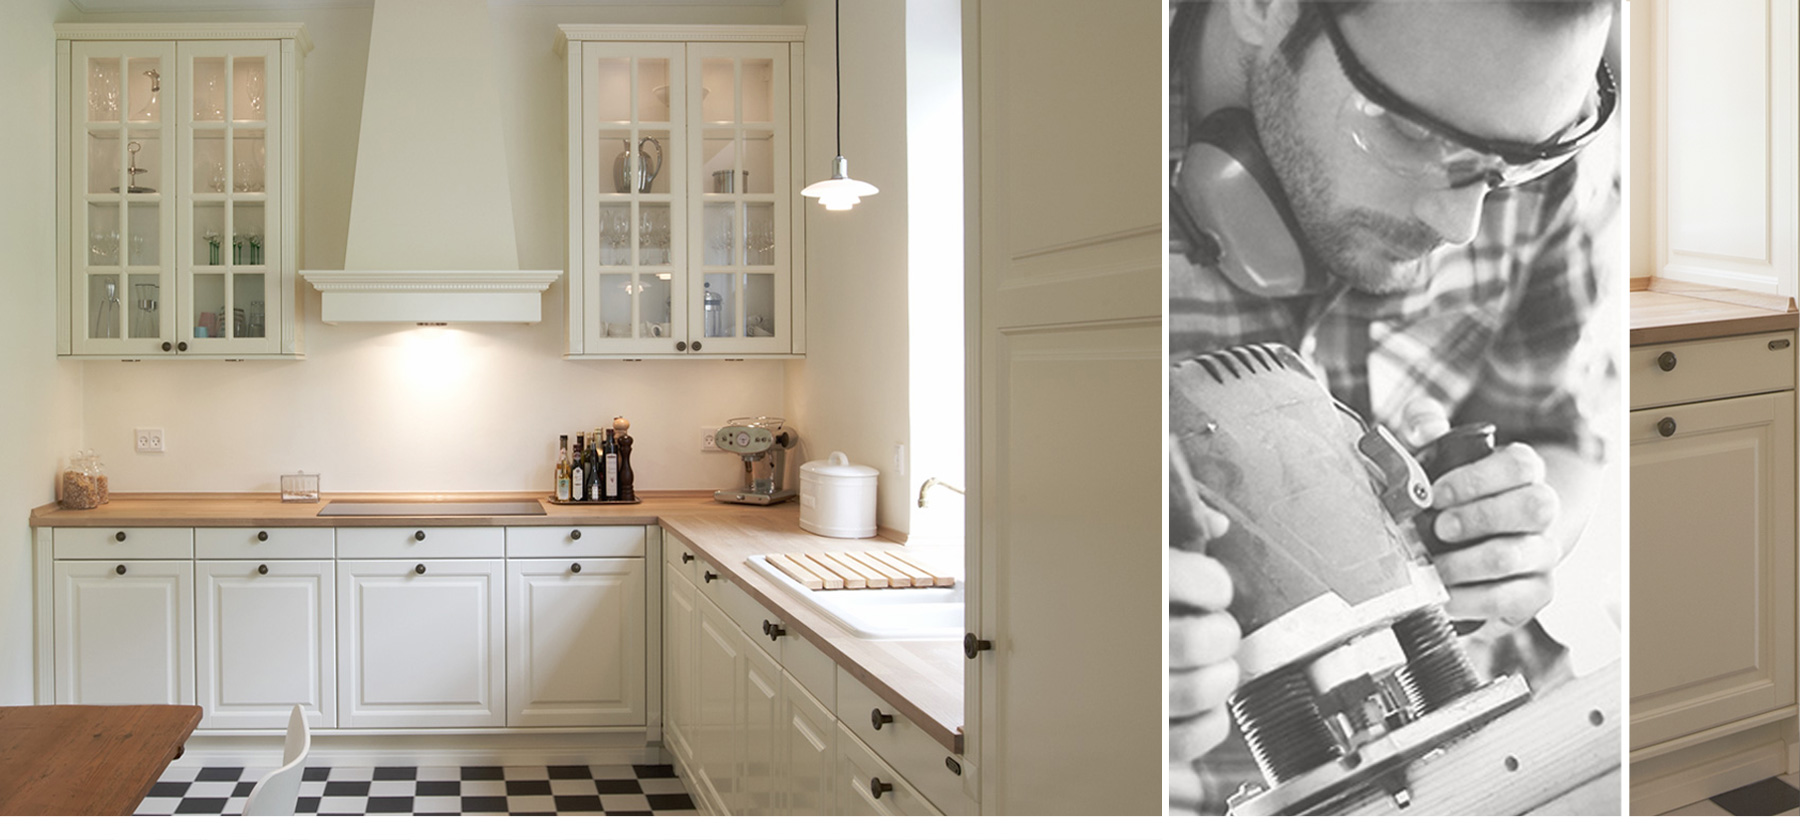 Joiner kitchensUNIQUE & BEAUTIFUL <br> Danish design craftmanship <br> - immerse into the different styles